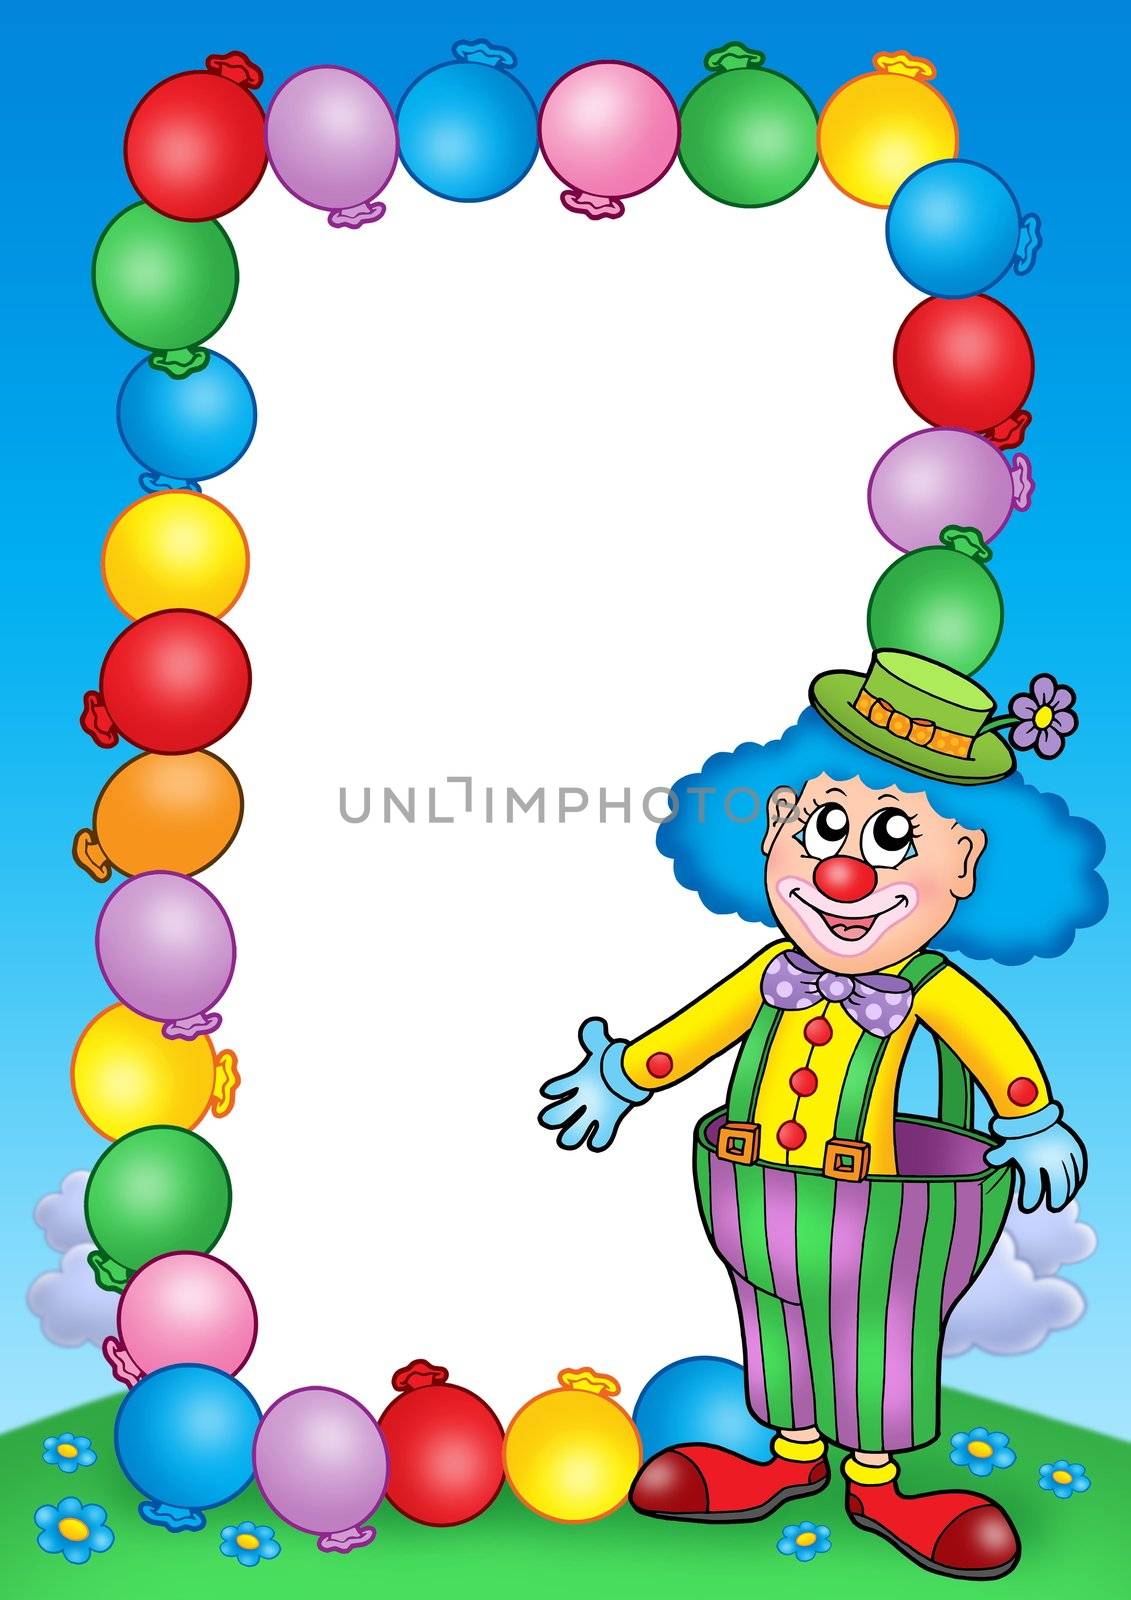 Party invitation frame with clown 7 - color illustration.